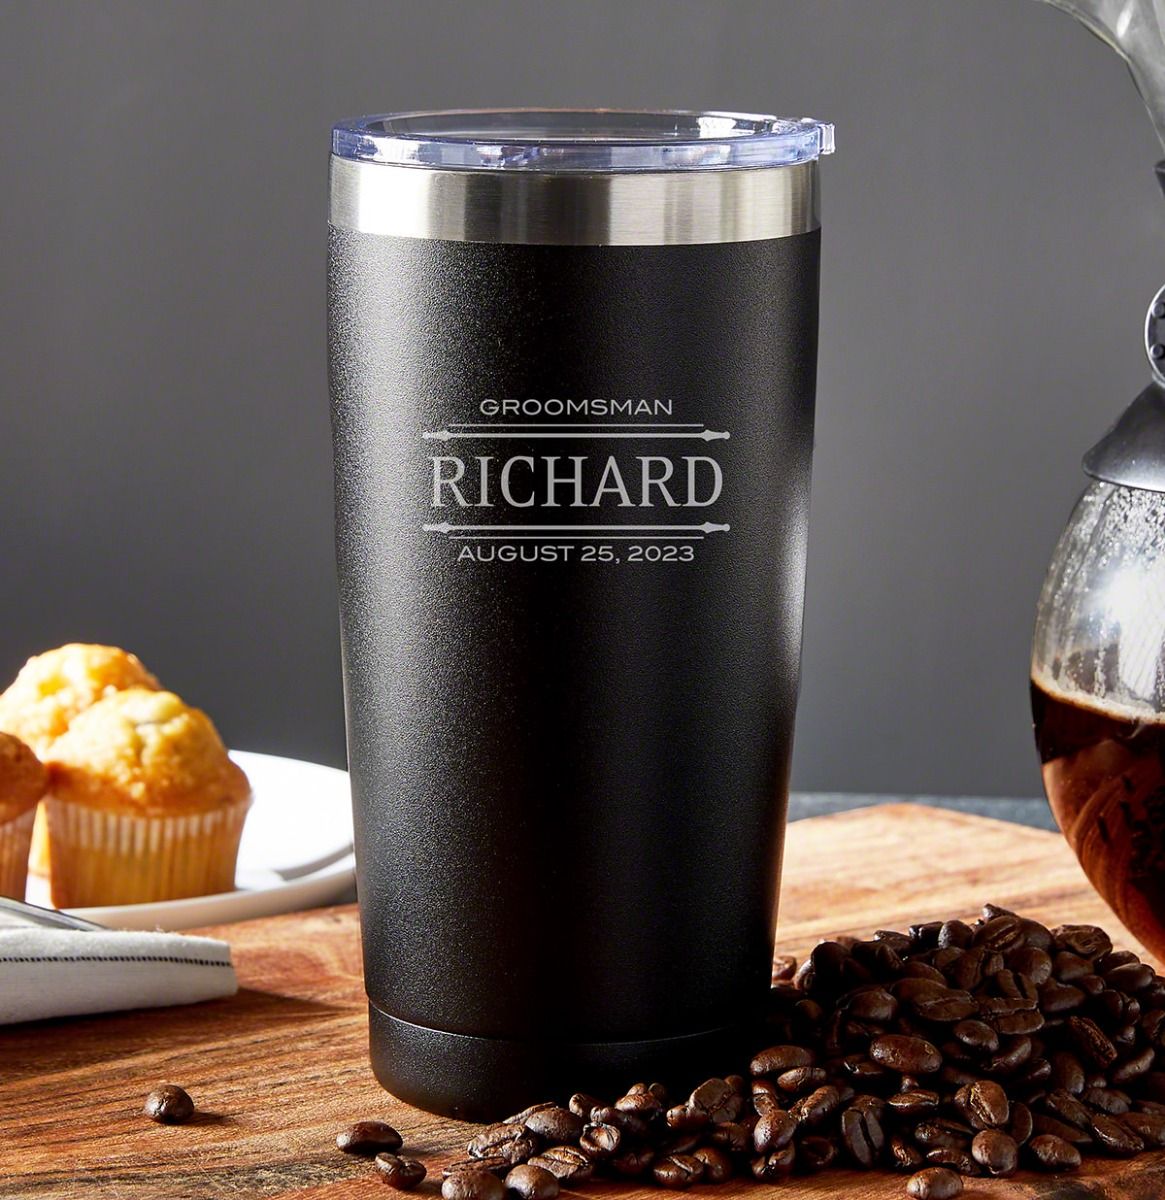 https://images.homewetbar.com/media/catalog/product/s/t/stanford-20-oz-black-stainless-steel-tumbler-p_7552.jpg?store=default&image-type=image